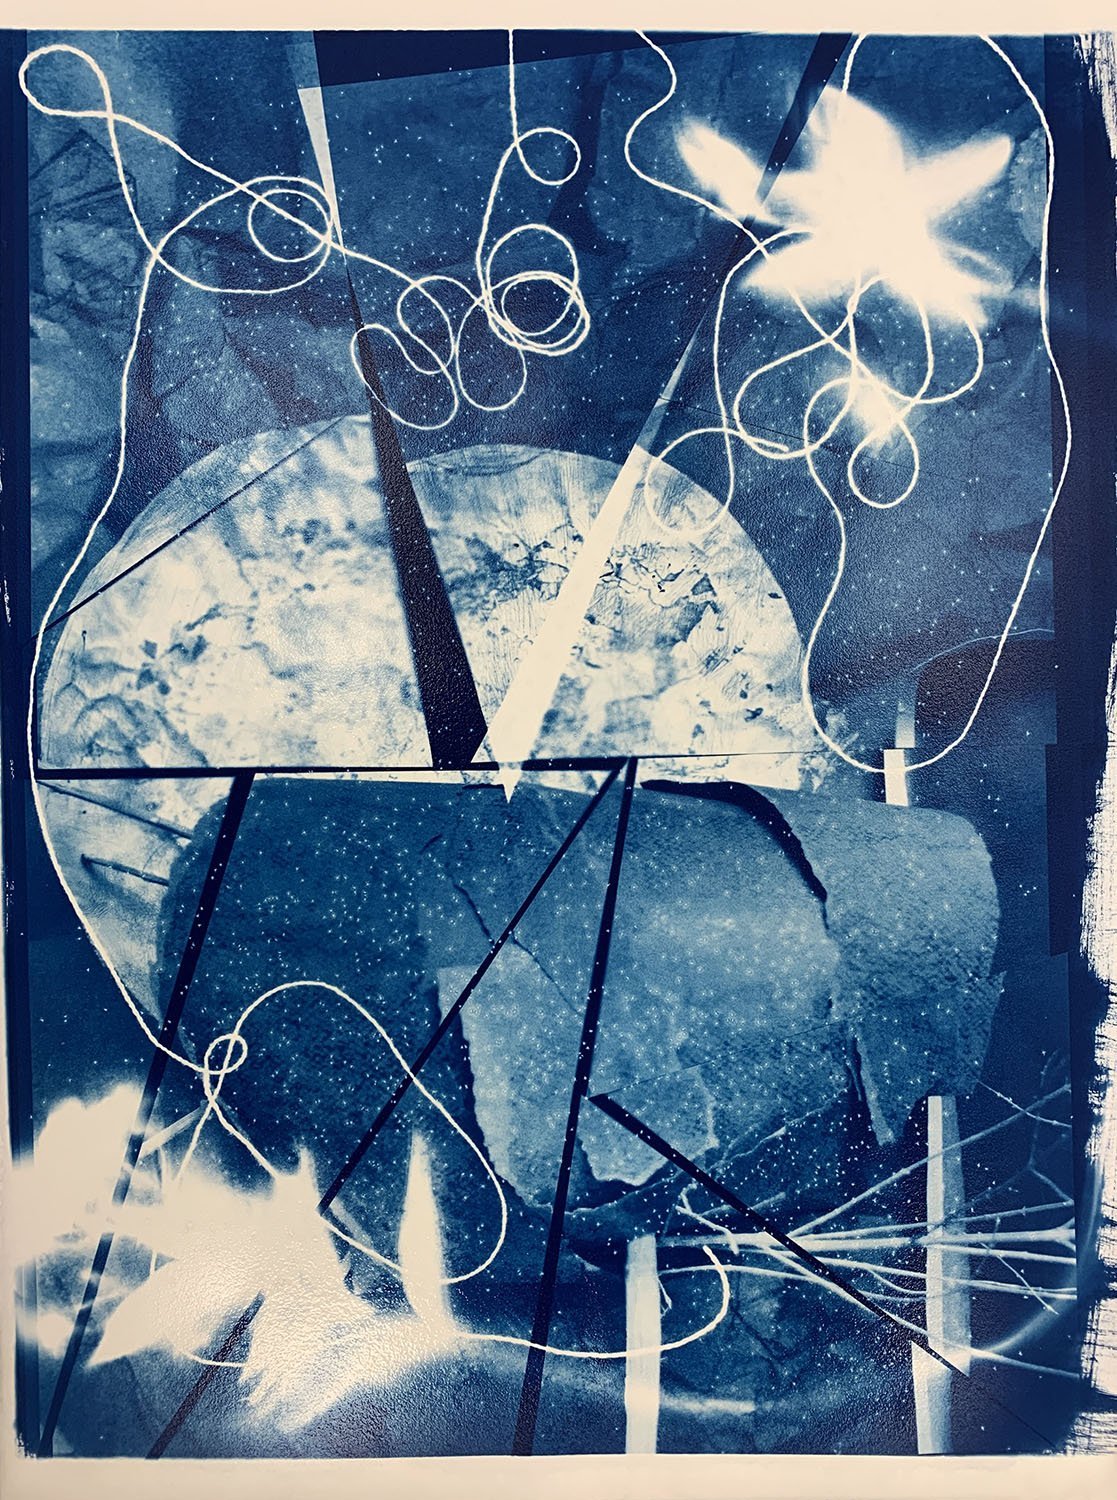 Production, Construction, Destruction, Repeat…,cyanotype with cut and reassembled digital negatives, cliché verre, and photogram elements, 30” x 22”